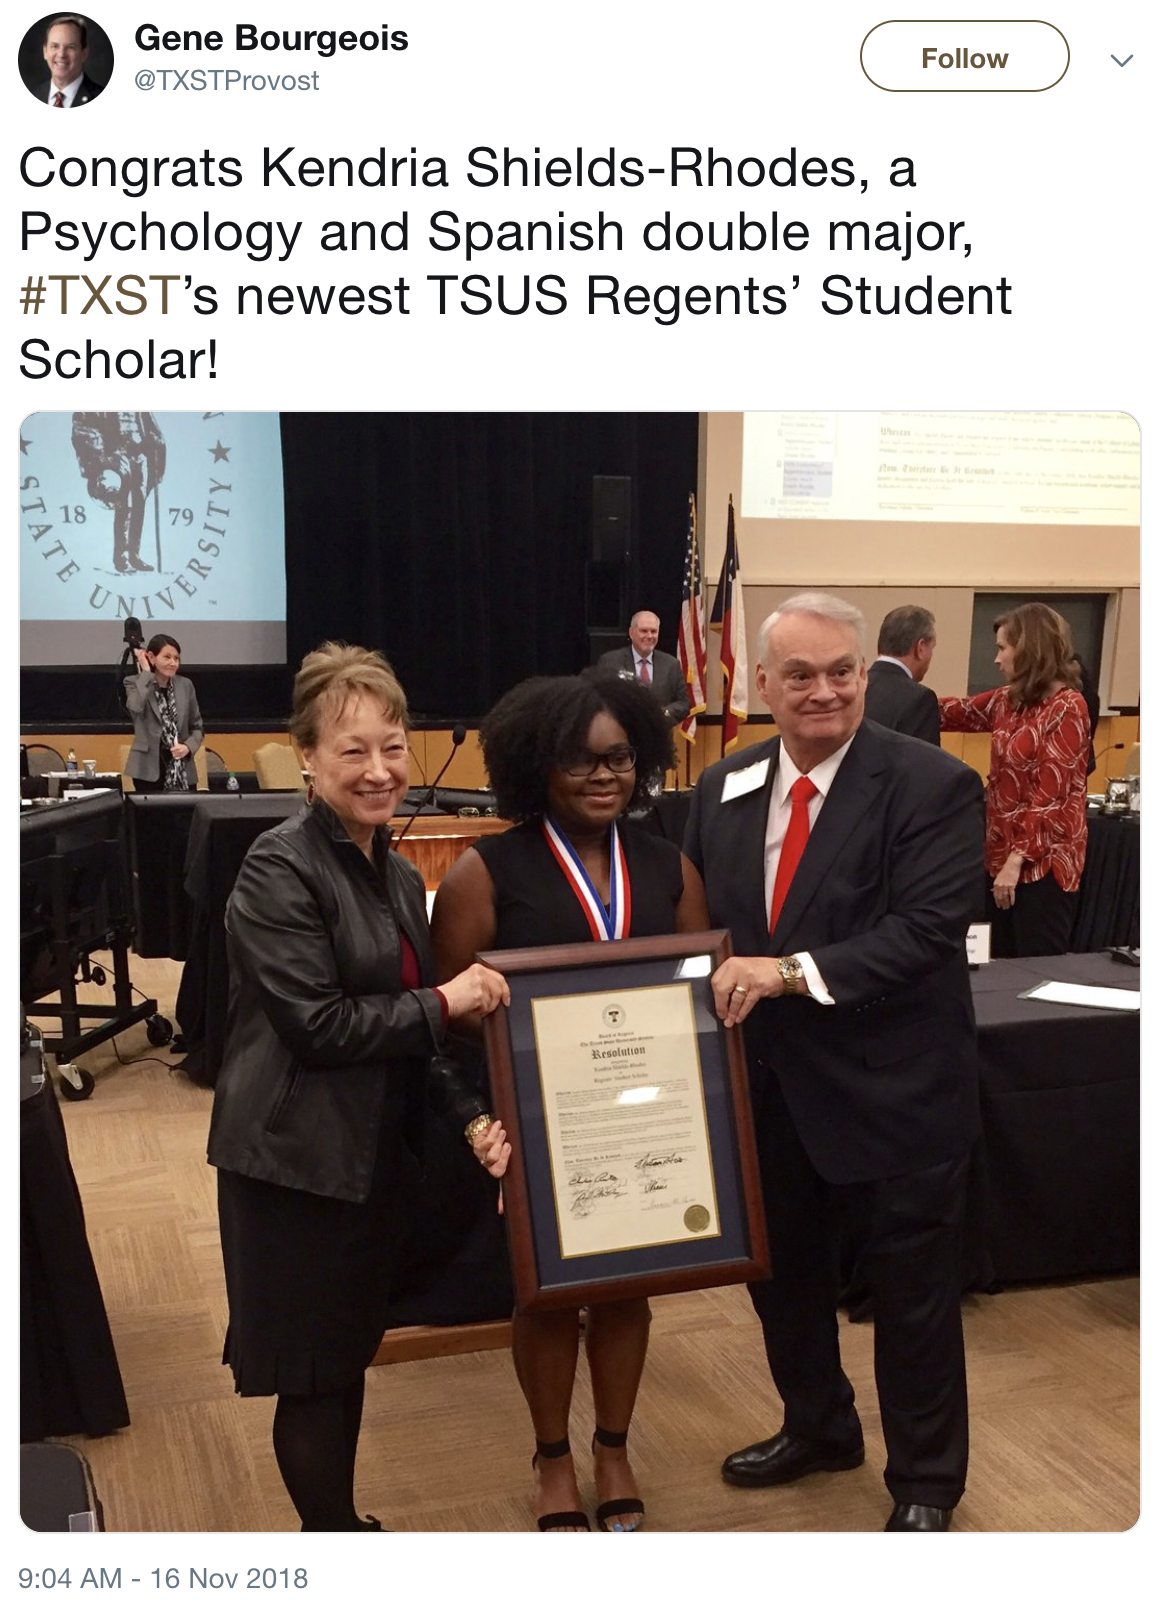 Tweet from Provost Gene Bourgeois congratulating Ms. Shield-Rhodes 